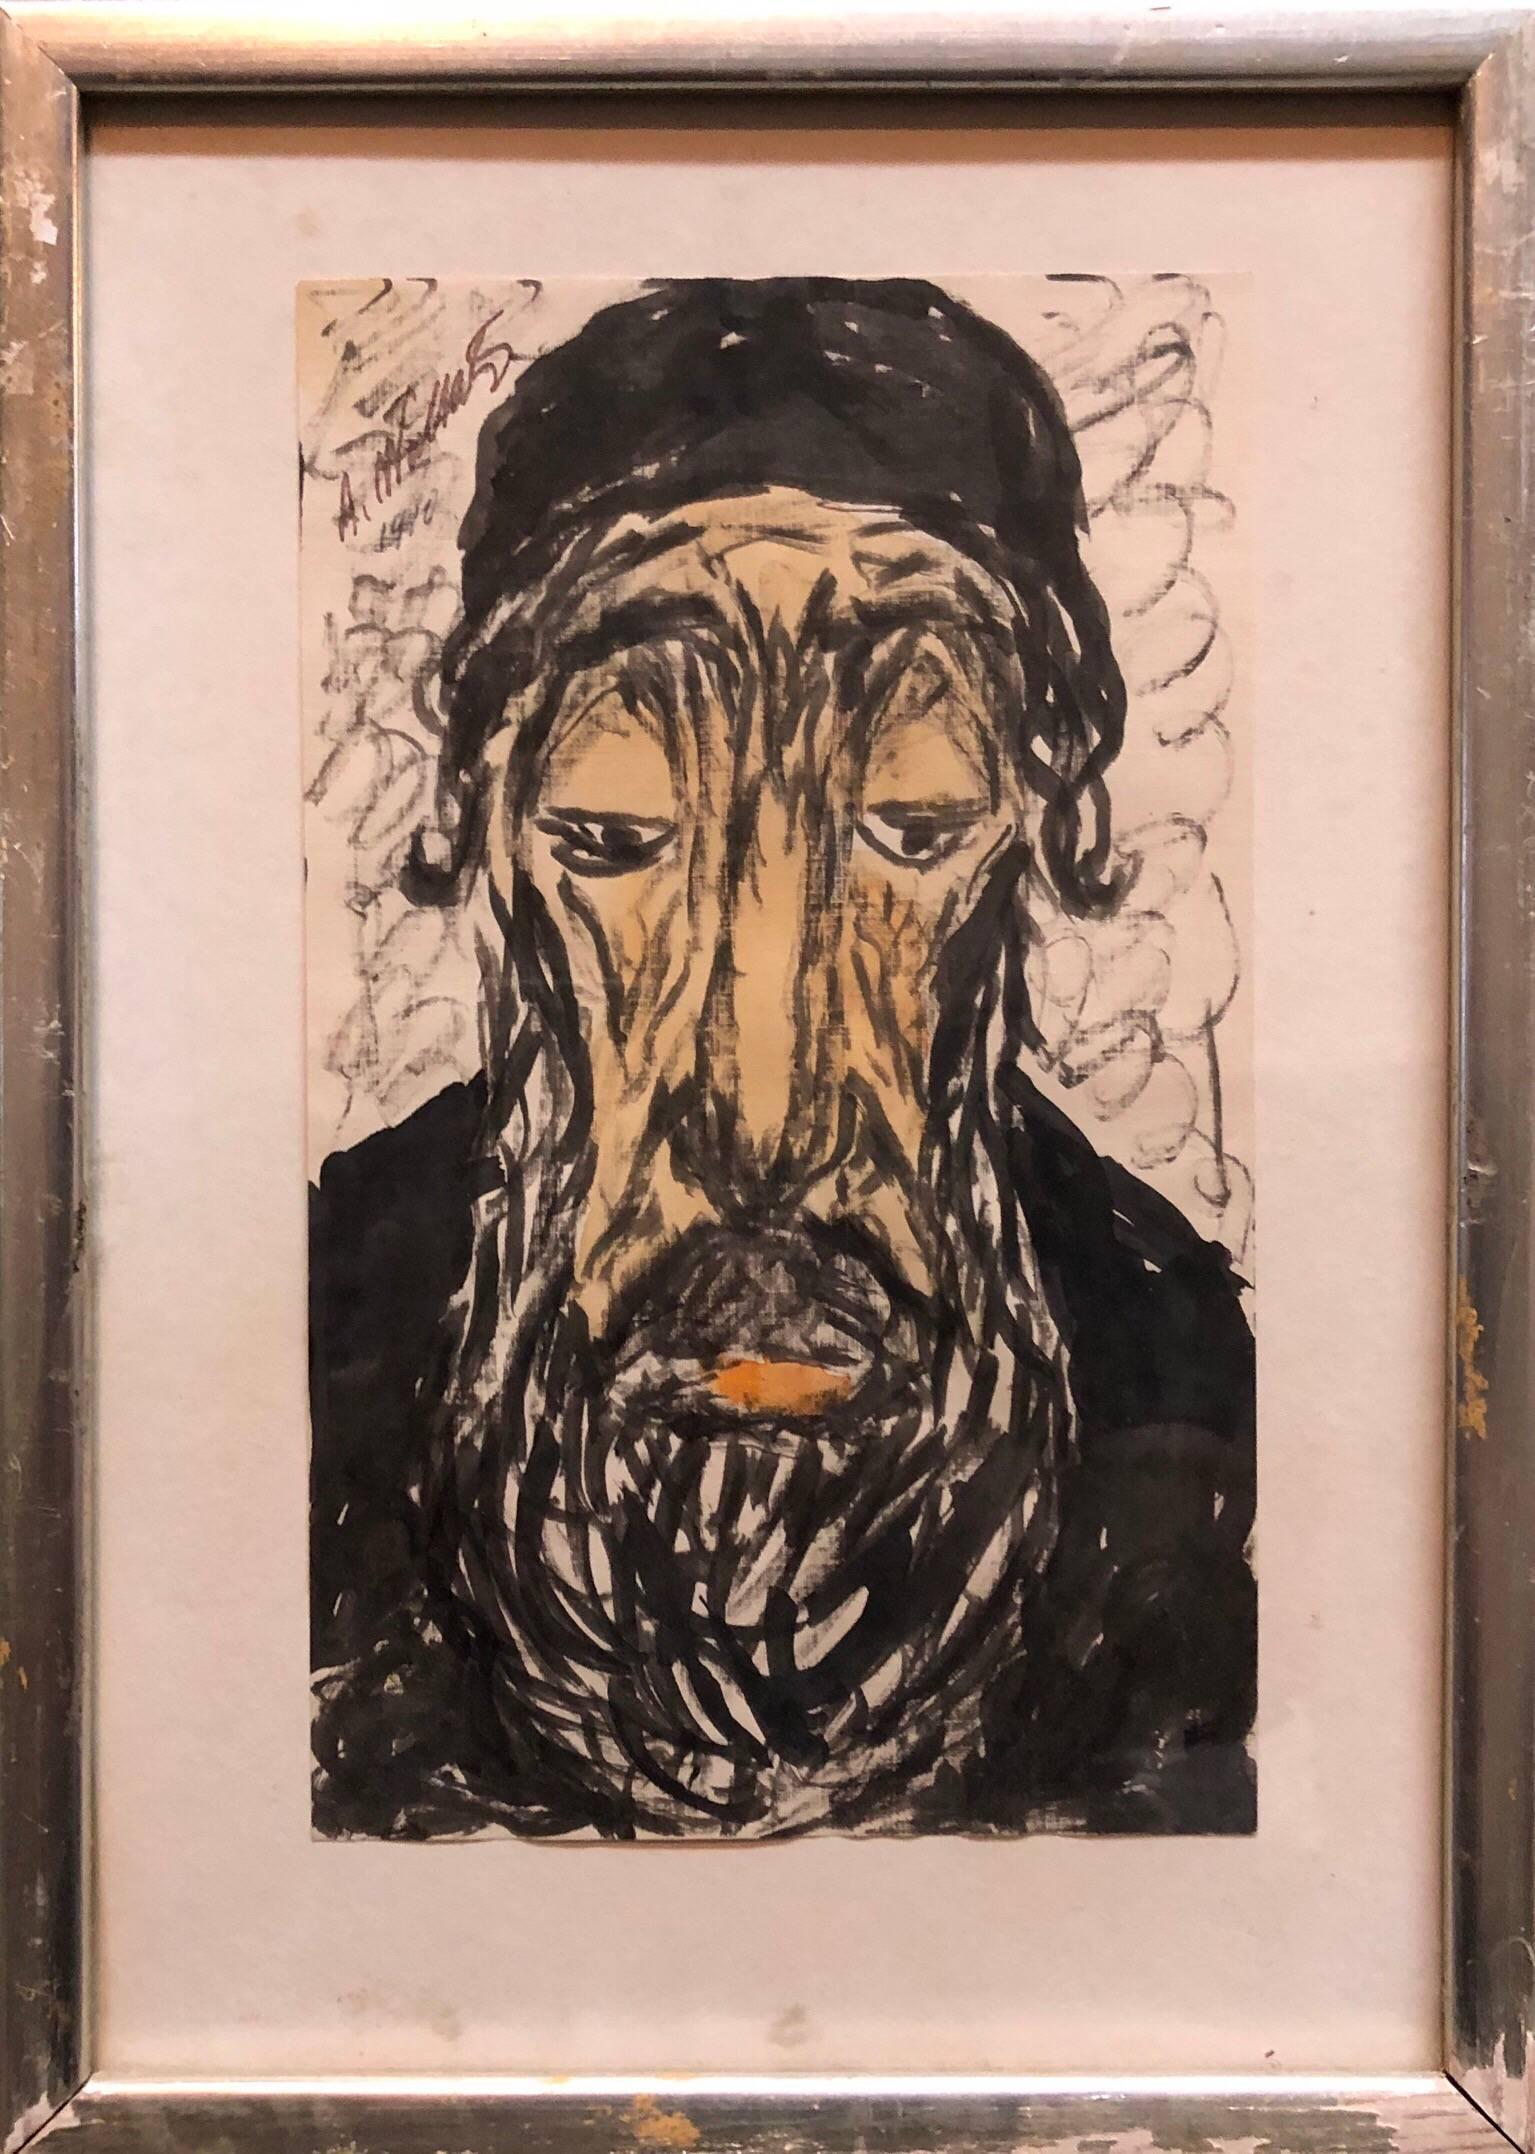 Modernist Watercolor Painting, Portrait of a Man, the Rabbi - Art by Abraham Walkowitz